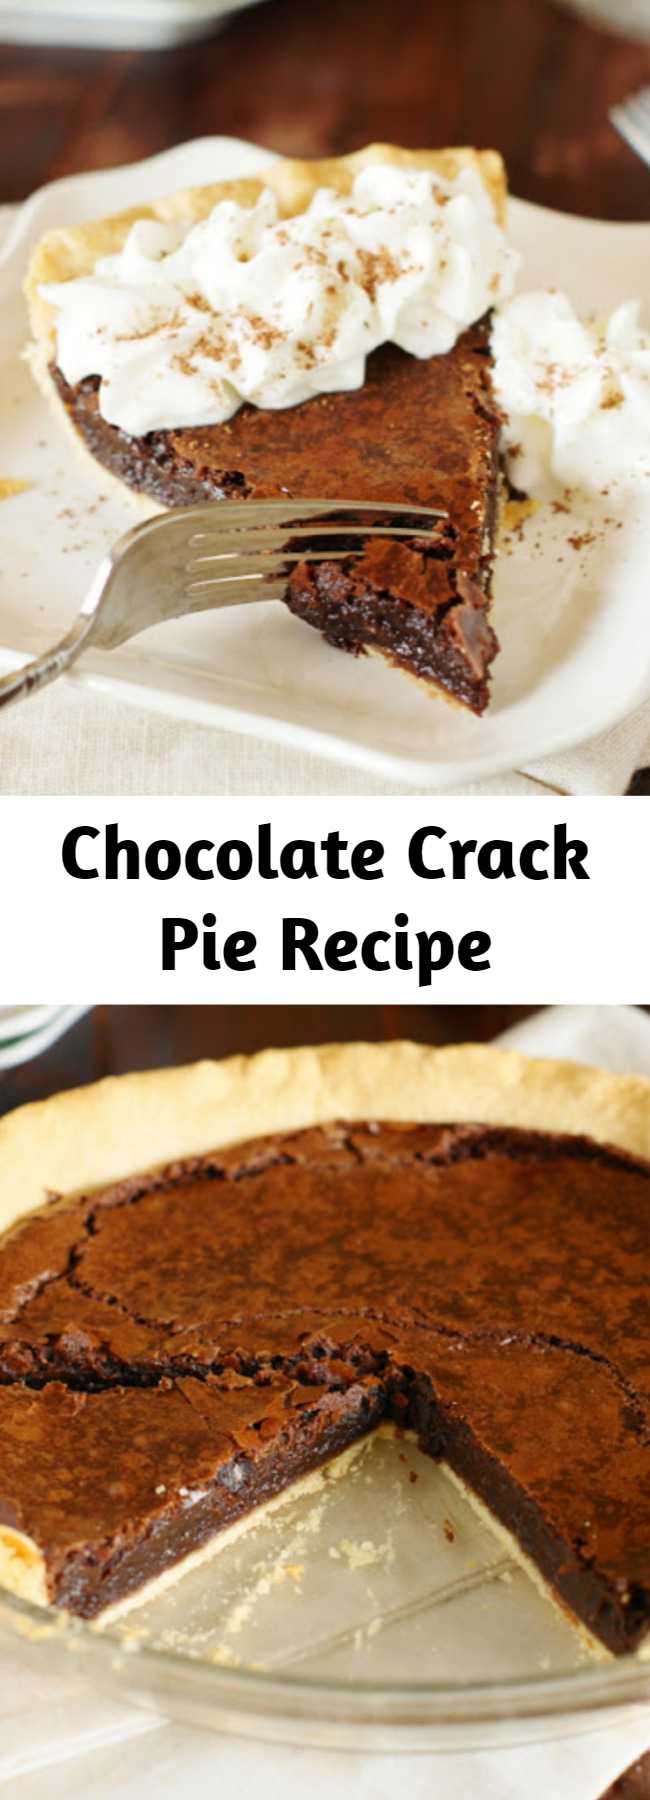 Chocolate Crack Pie Recipe - When you think Chocolate Crack Pie think amazingly-rich-and-fudgy, addictively delicious, scratch-made gooey brownie ... in a crust. And it truly just doesn't get much better than that.